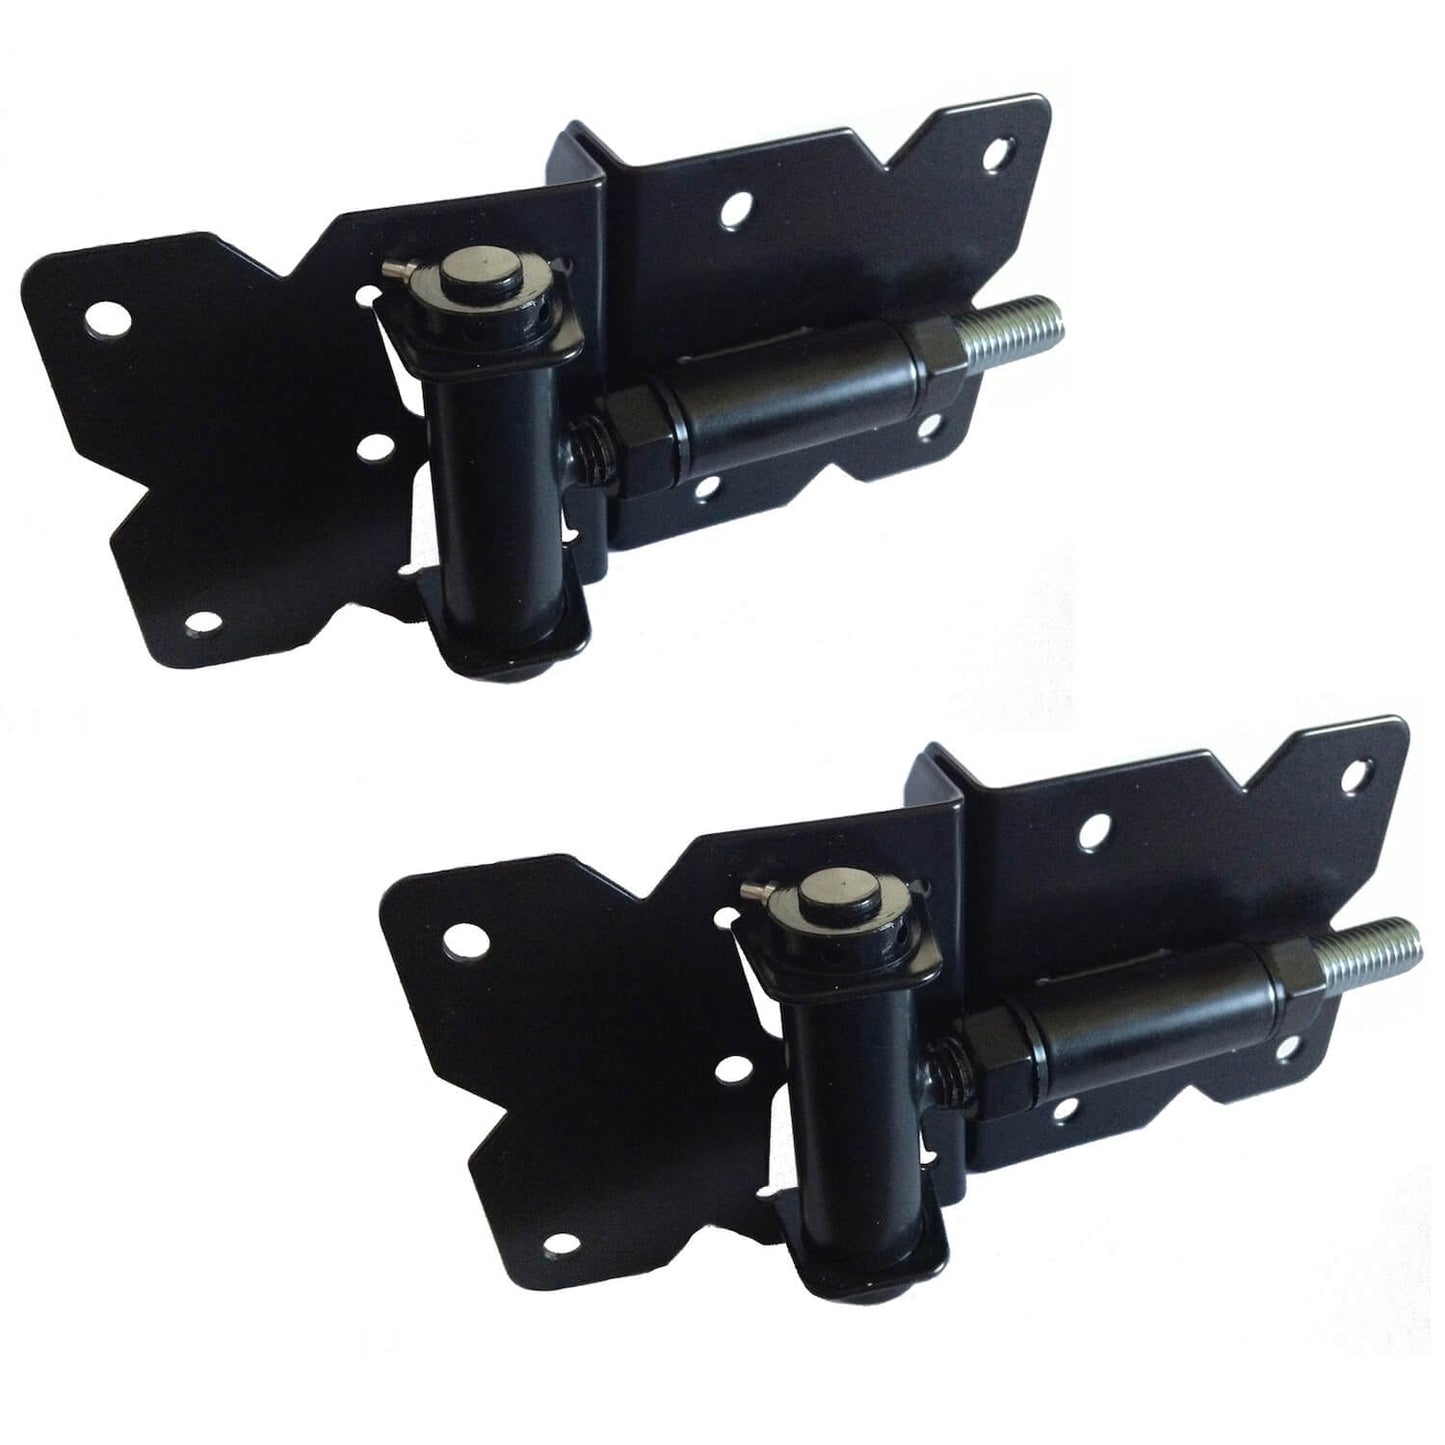 Vinyl Gate Hinges - For Vinyl, PVC or Plastic Fencing. Vinyl Fence Gate Hinges w/Mounting Hardware. Available in Standard and Self-Closing